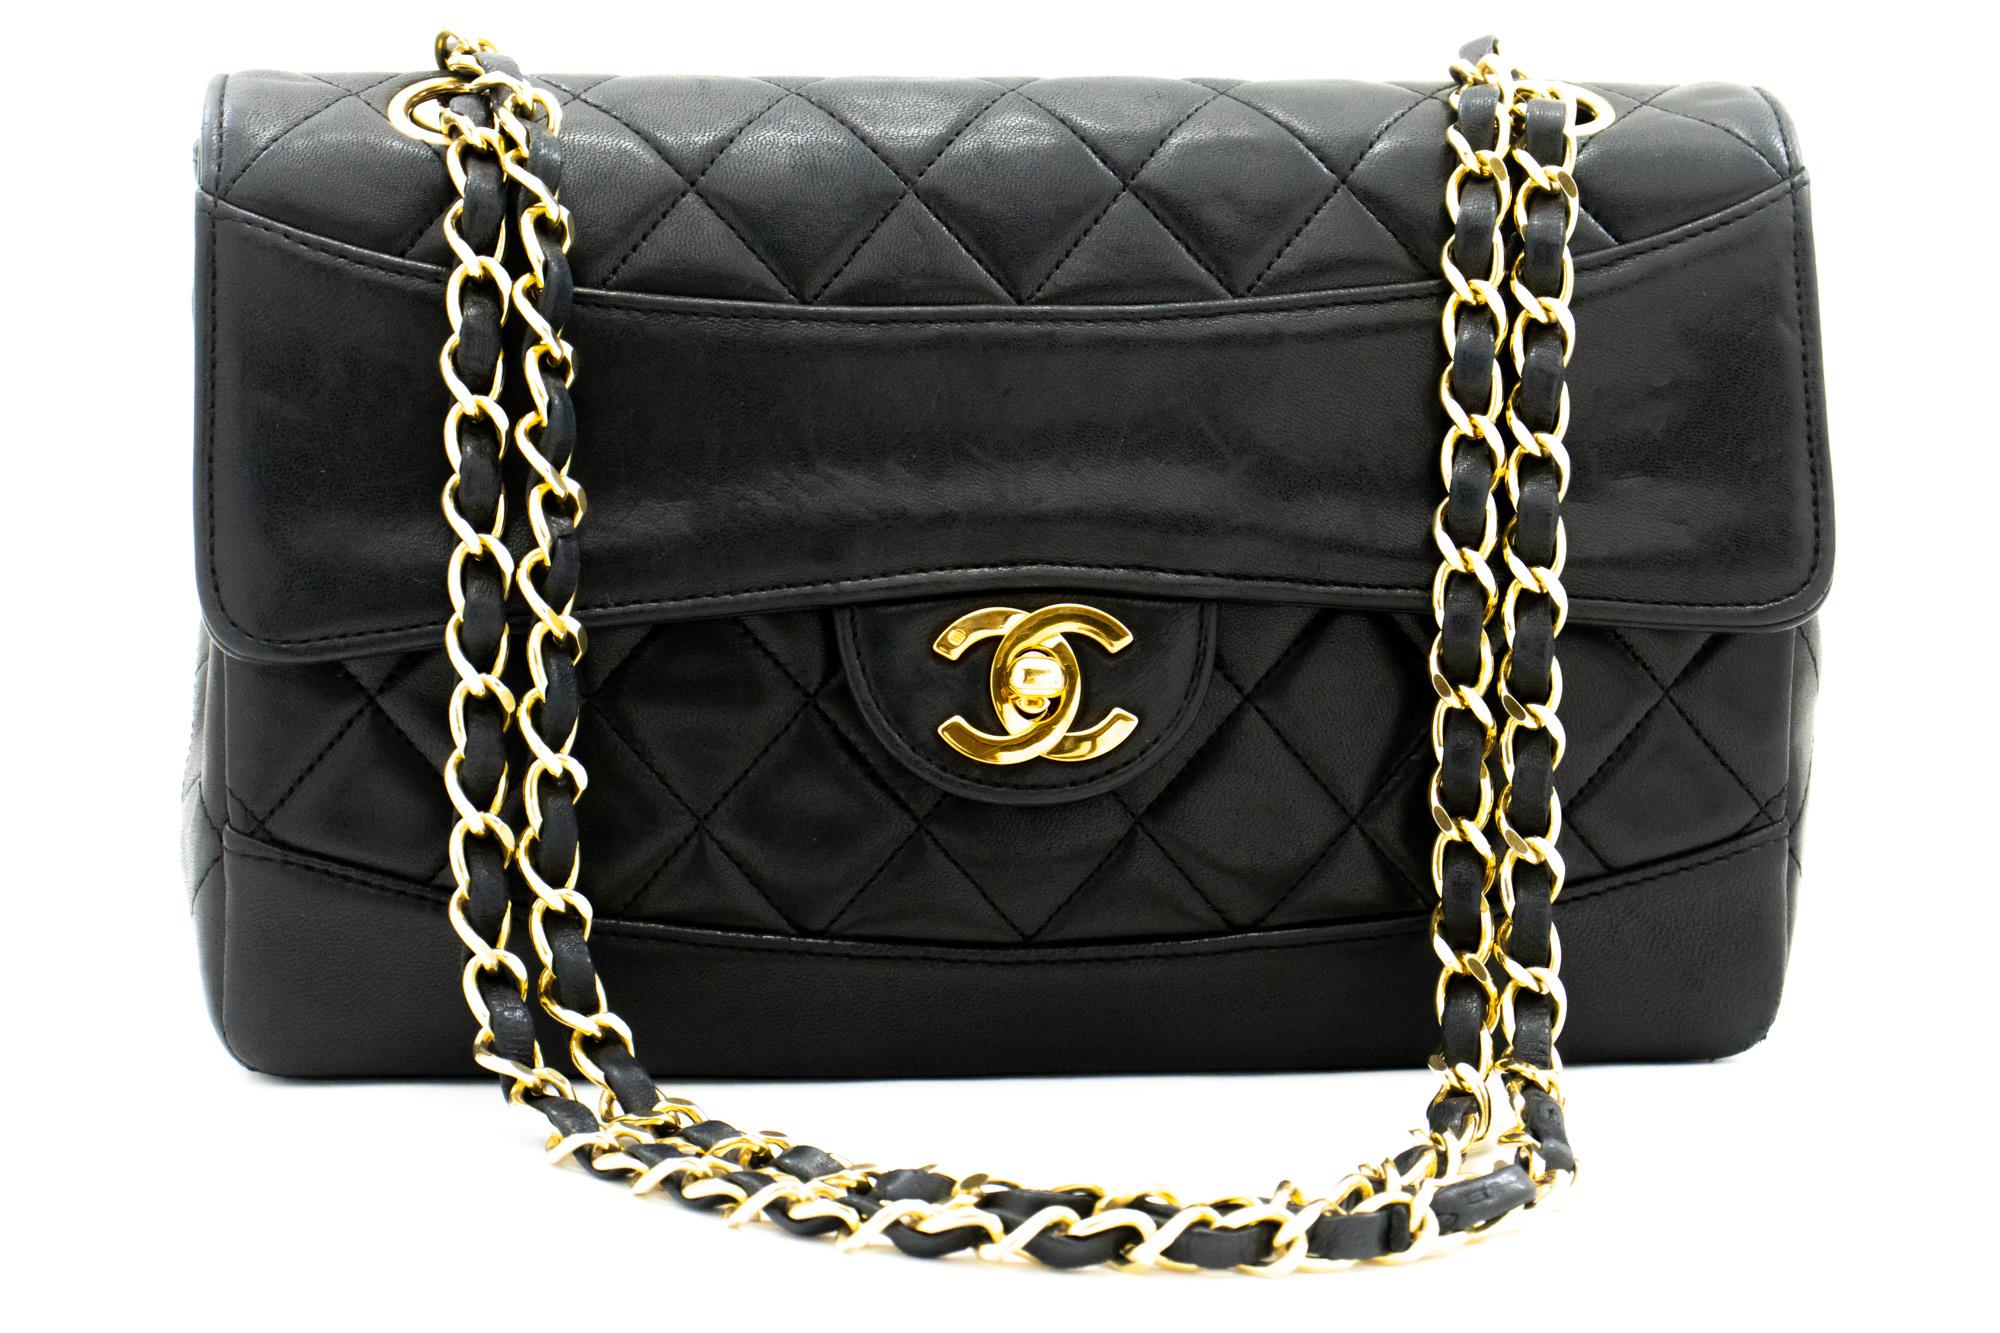 An authentic CHANEL Vintage Classic Chain Shoulder Bag Flap Quilted made of black Lambskin. The color is Black. The outside material is Leather. The pattern is Solid. This item is Vintage / Classic. The year of manufacture would be